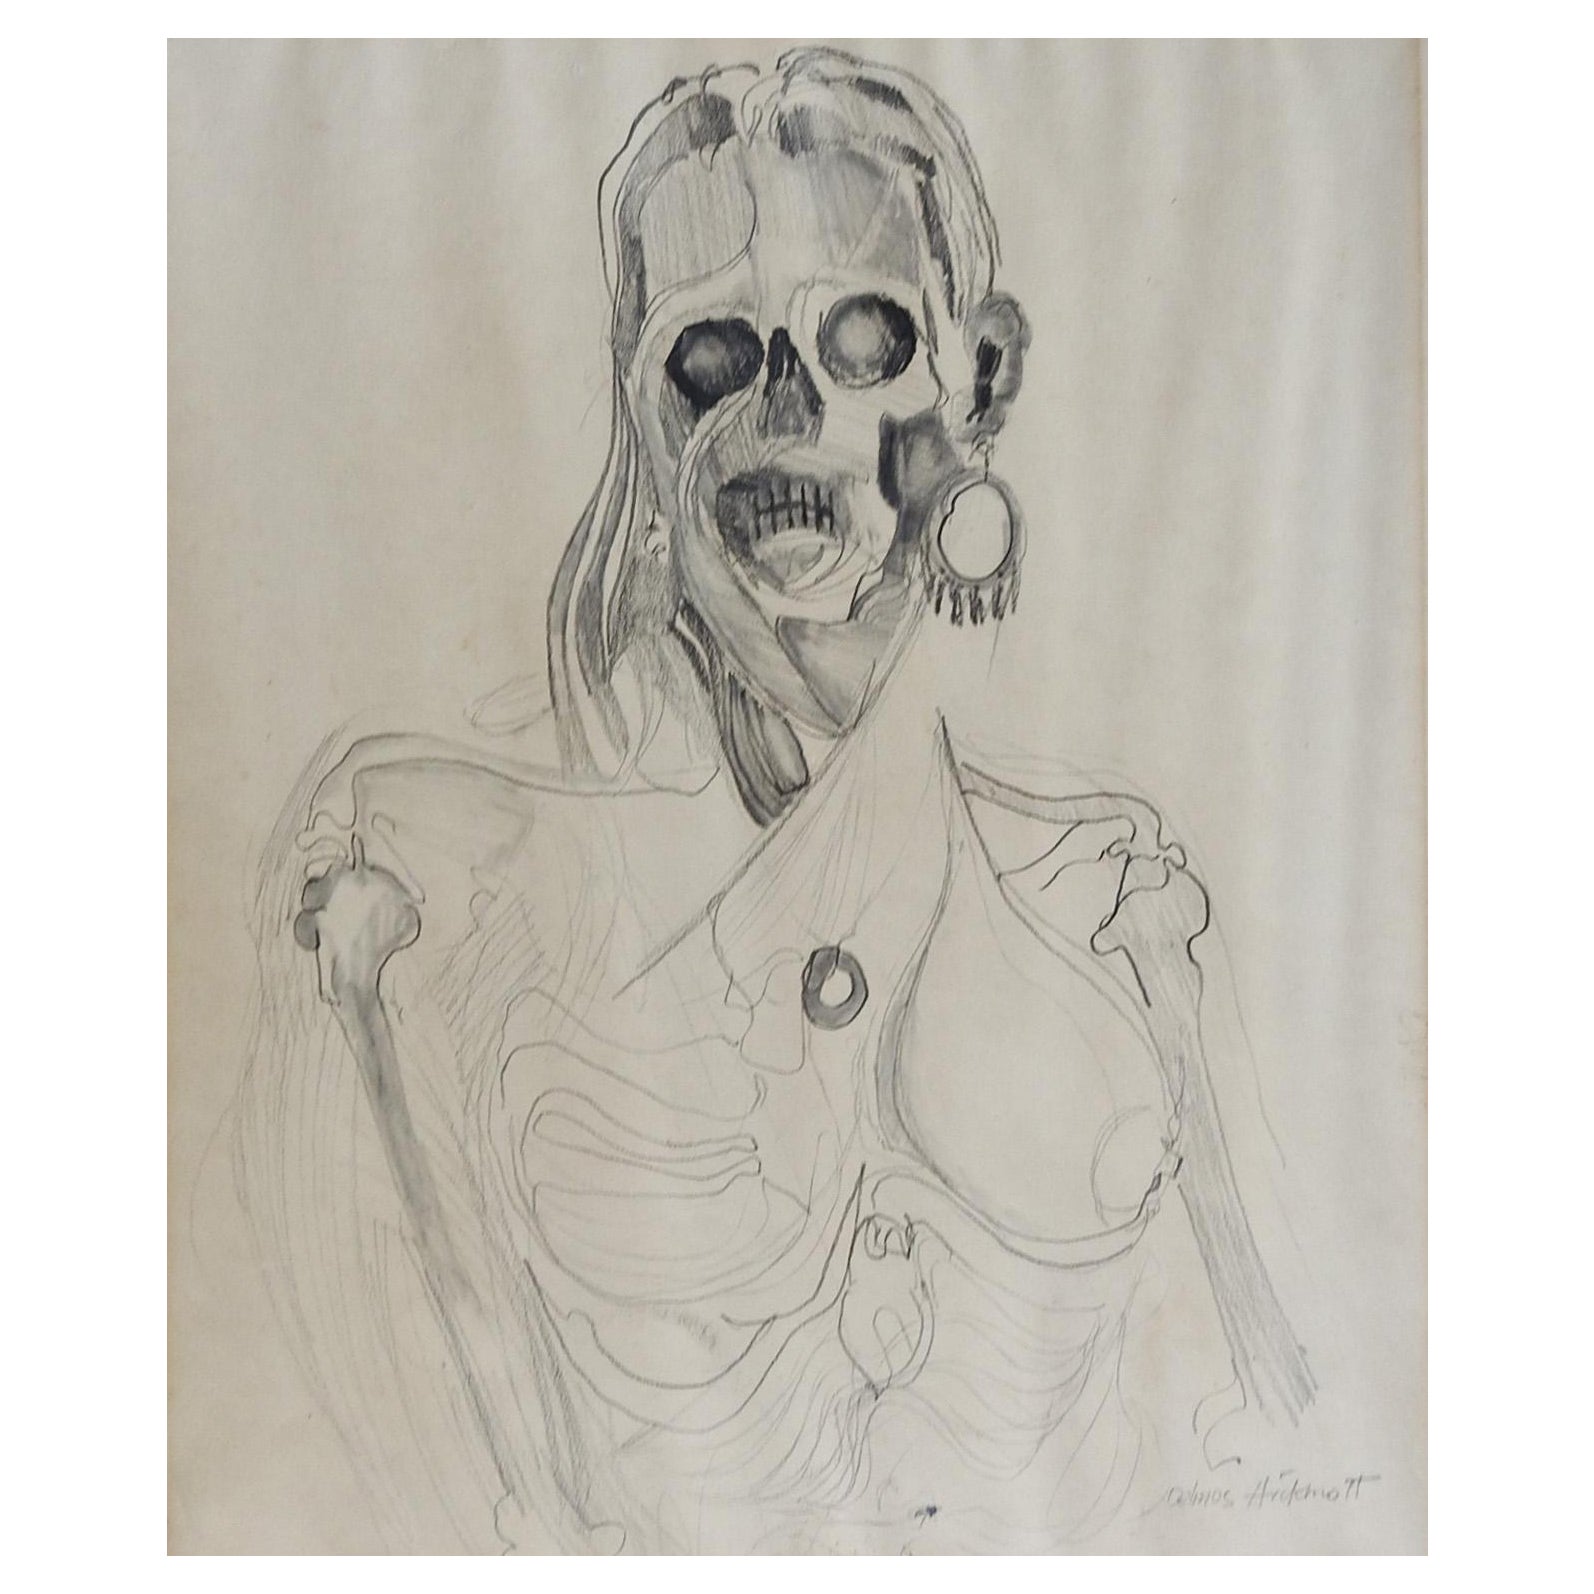 Abstract Illustration Zombie Science Fiction Original Pencil Drawing